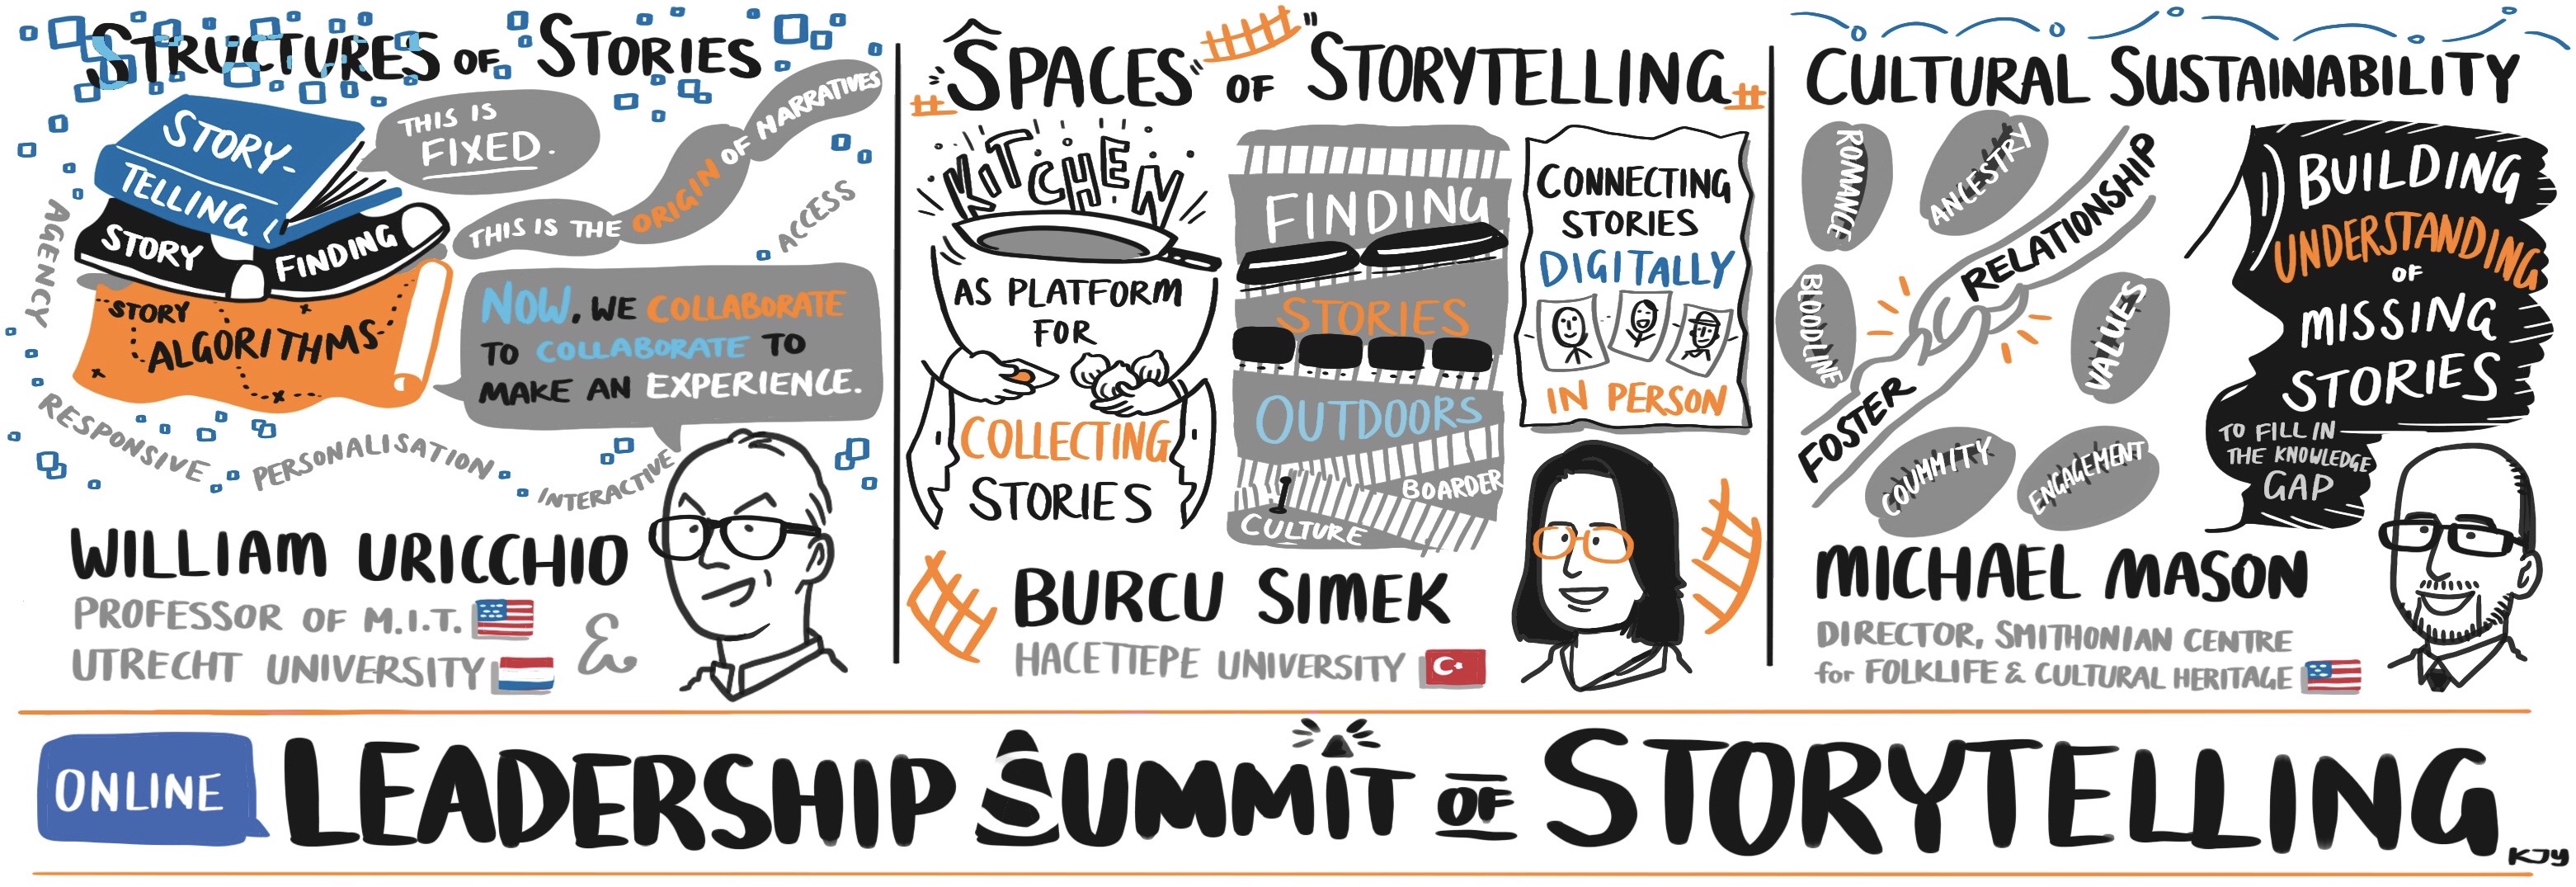 Leadership Summit on Applied Storytelling - Day 2 - Image drawn by Karen Sung